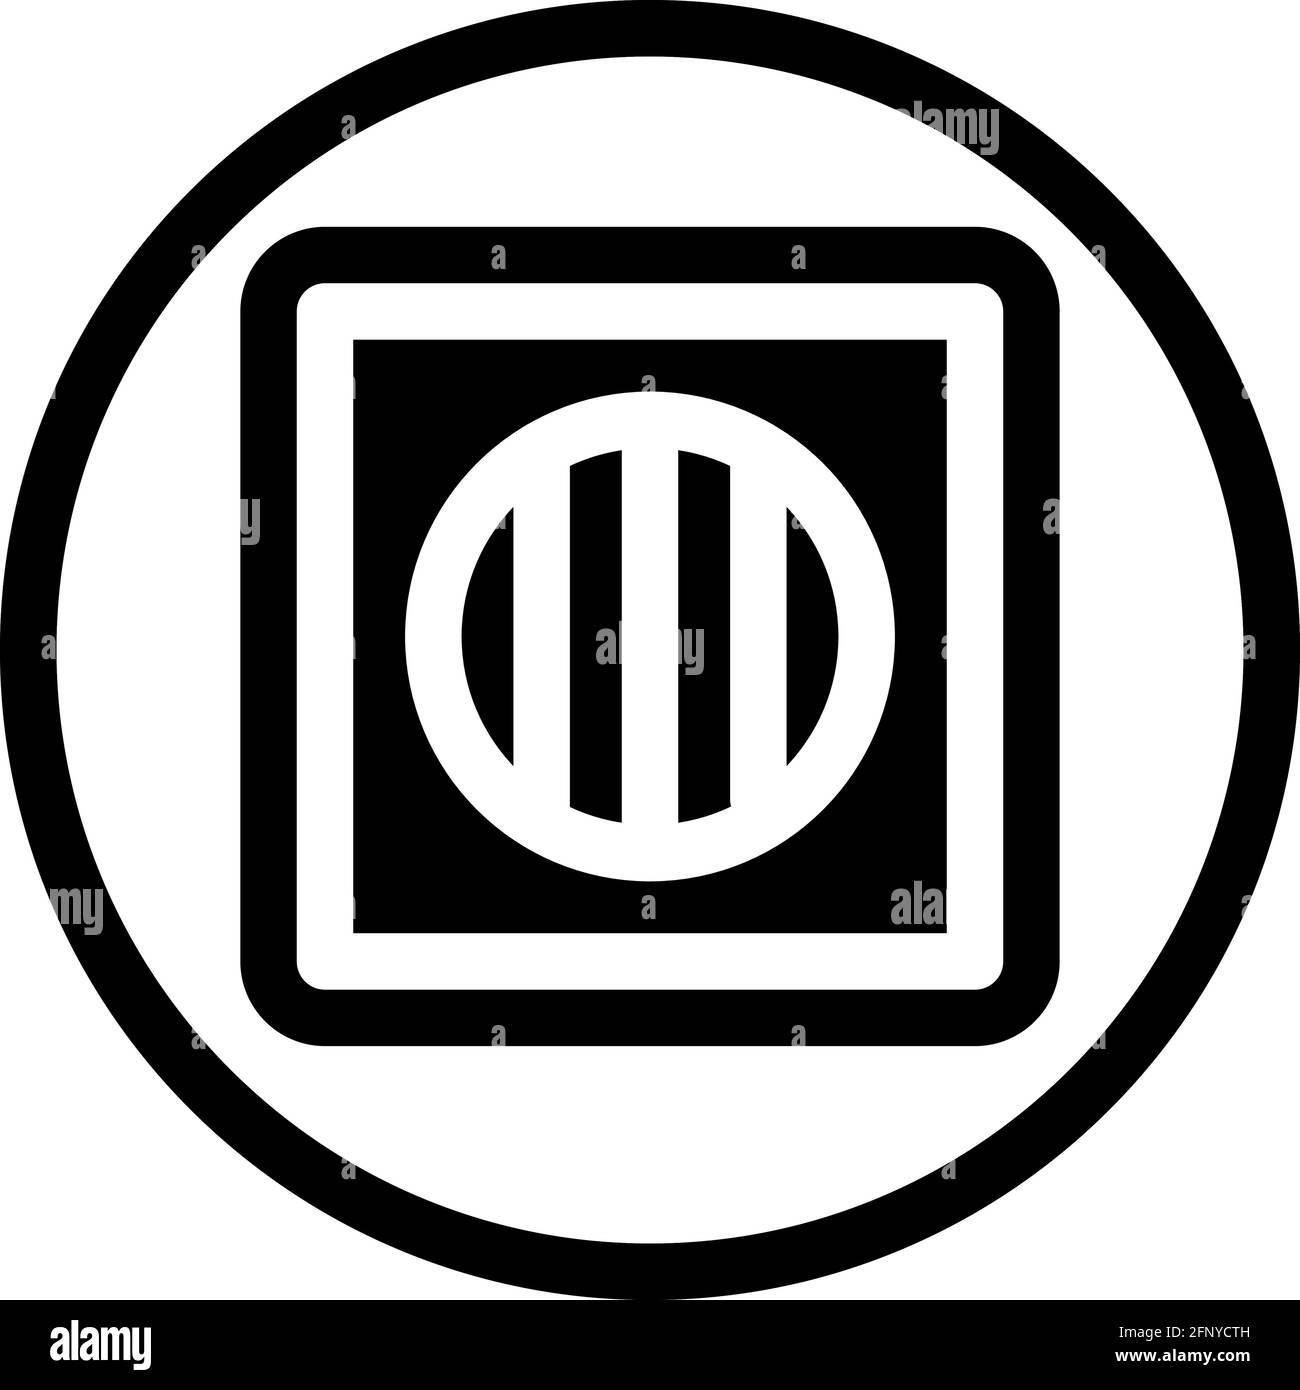 Outdoor unit icon in flat design with black color and outline on a line circle background. Stock Vector